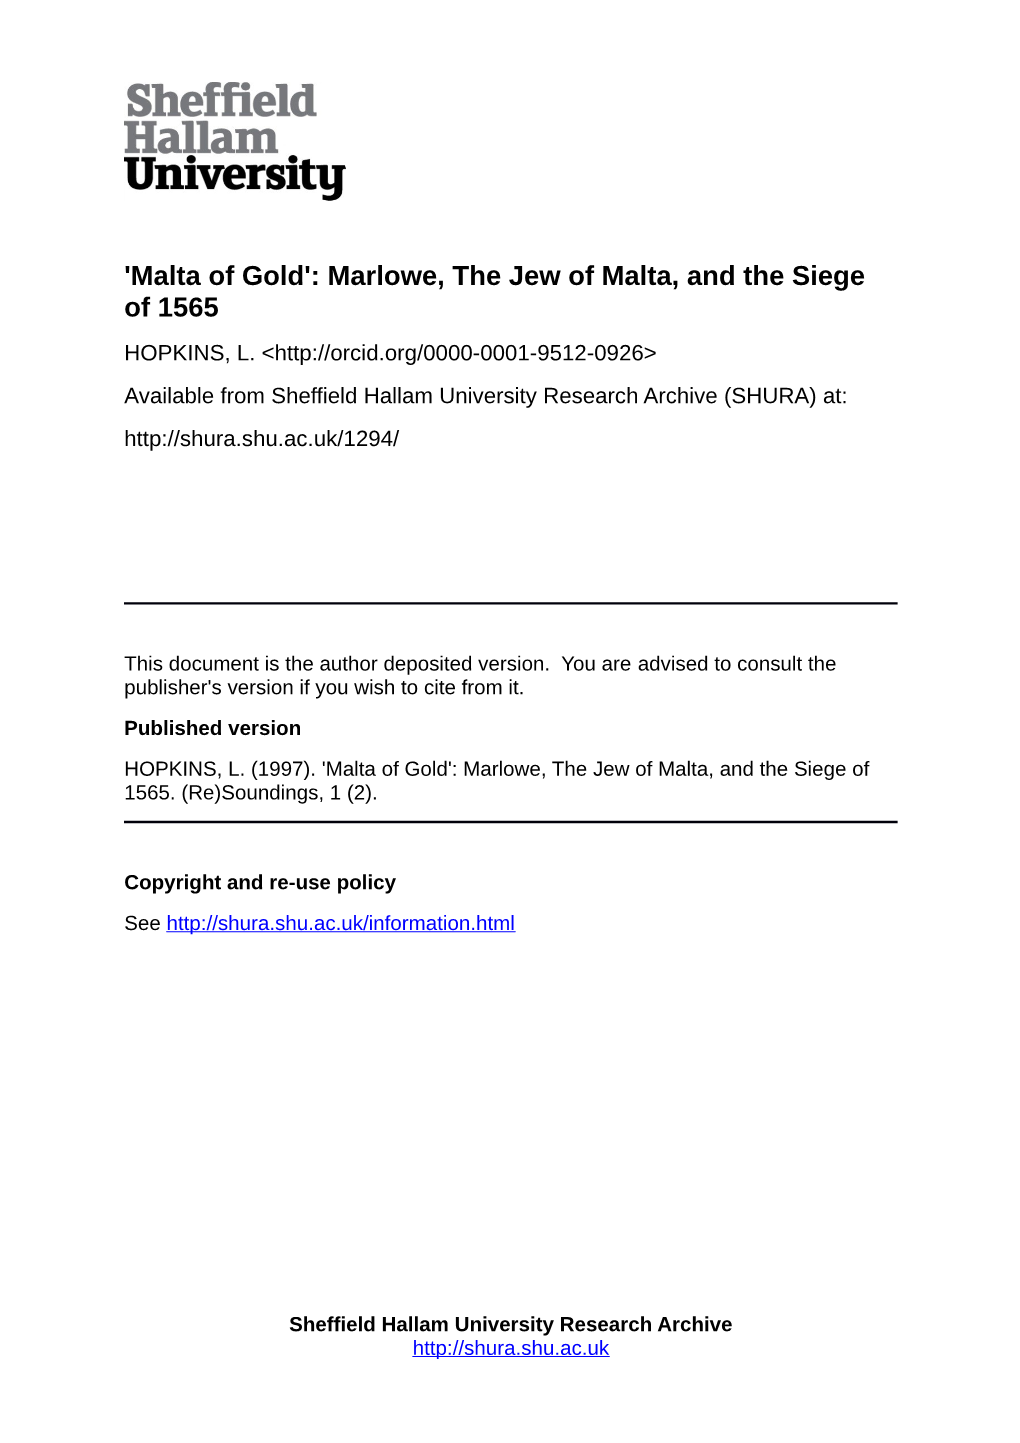 V.1, I.2 (1997) SN 22: Malta of Gold, Table of Contents